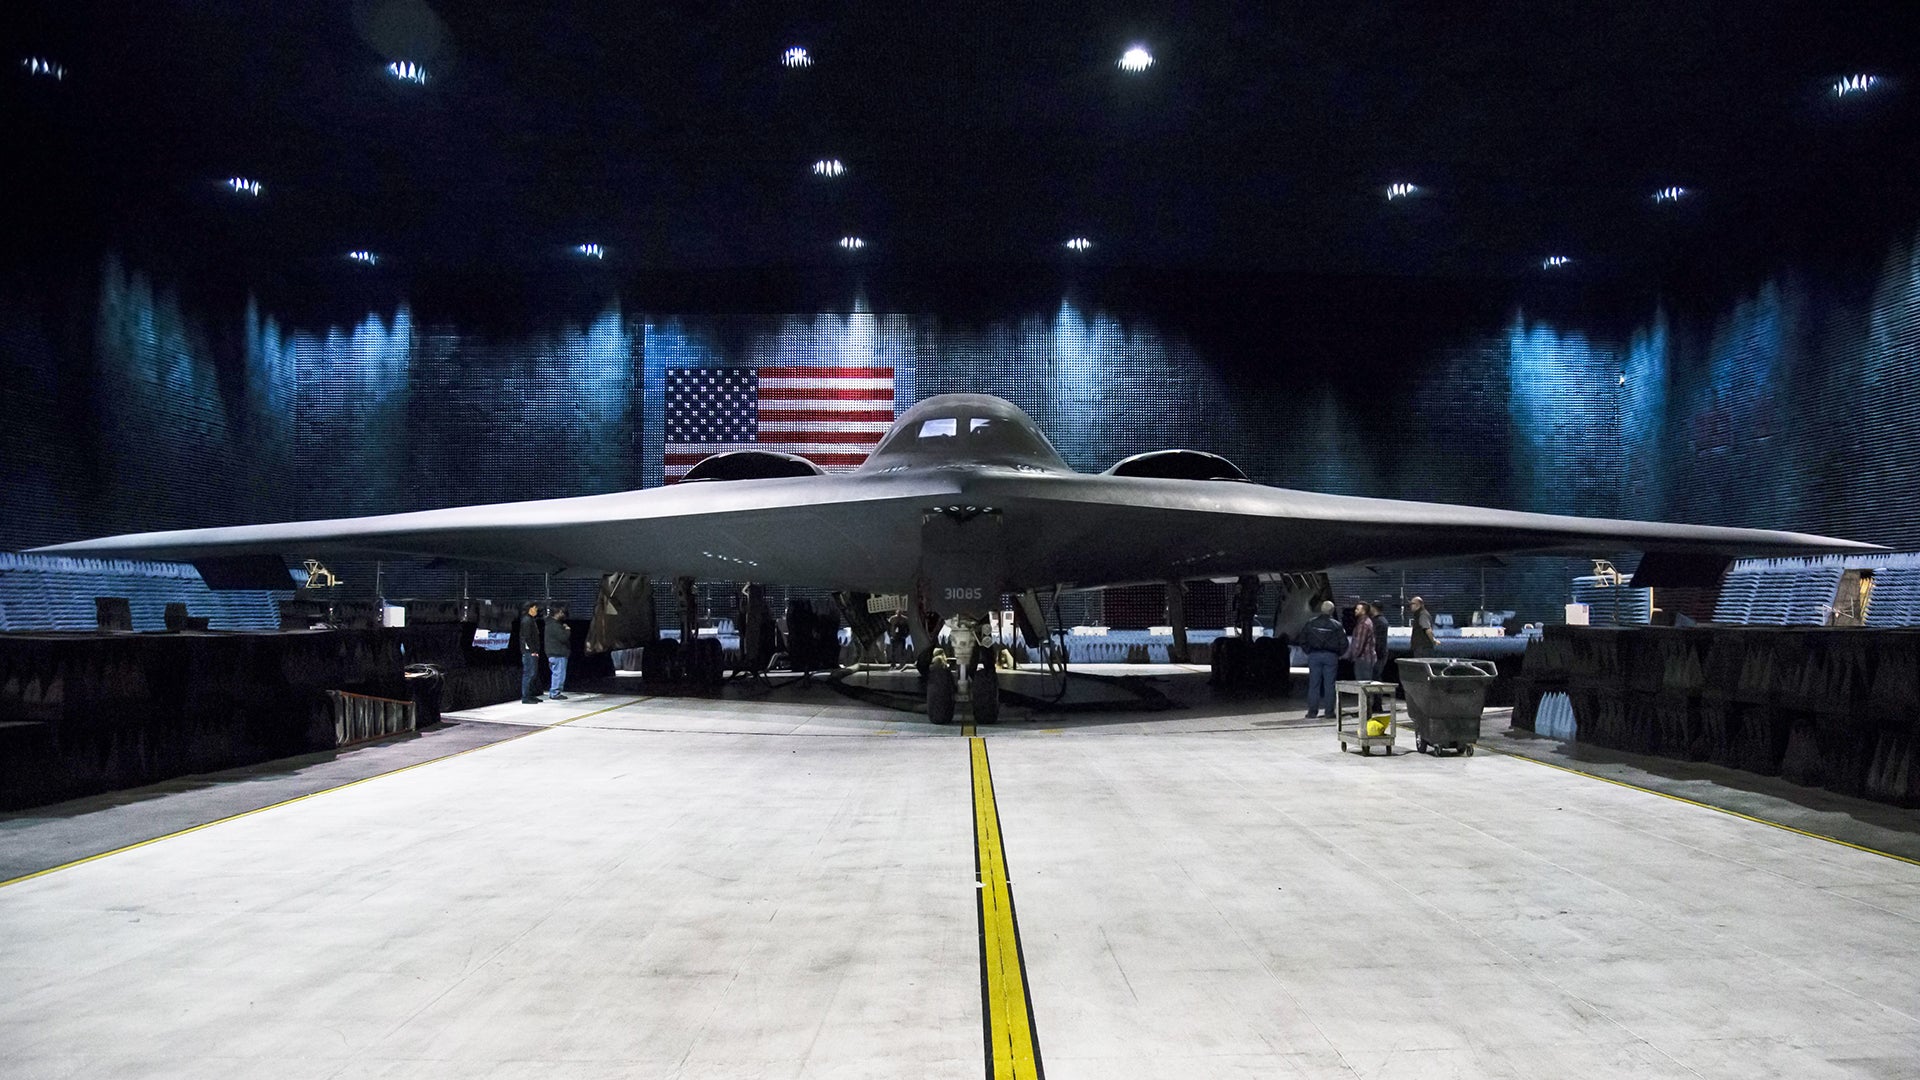 Check Out The B-2 Stealth Bomber’s First Visit To Edwards AFB’s Massive Anechoic Chamber